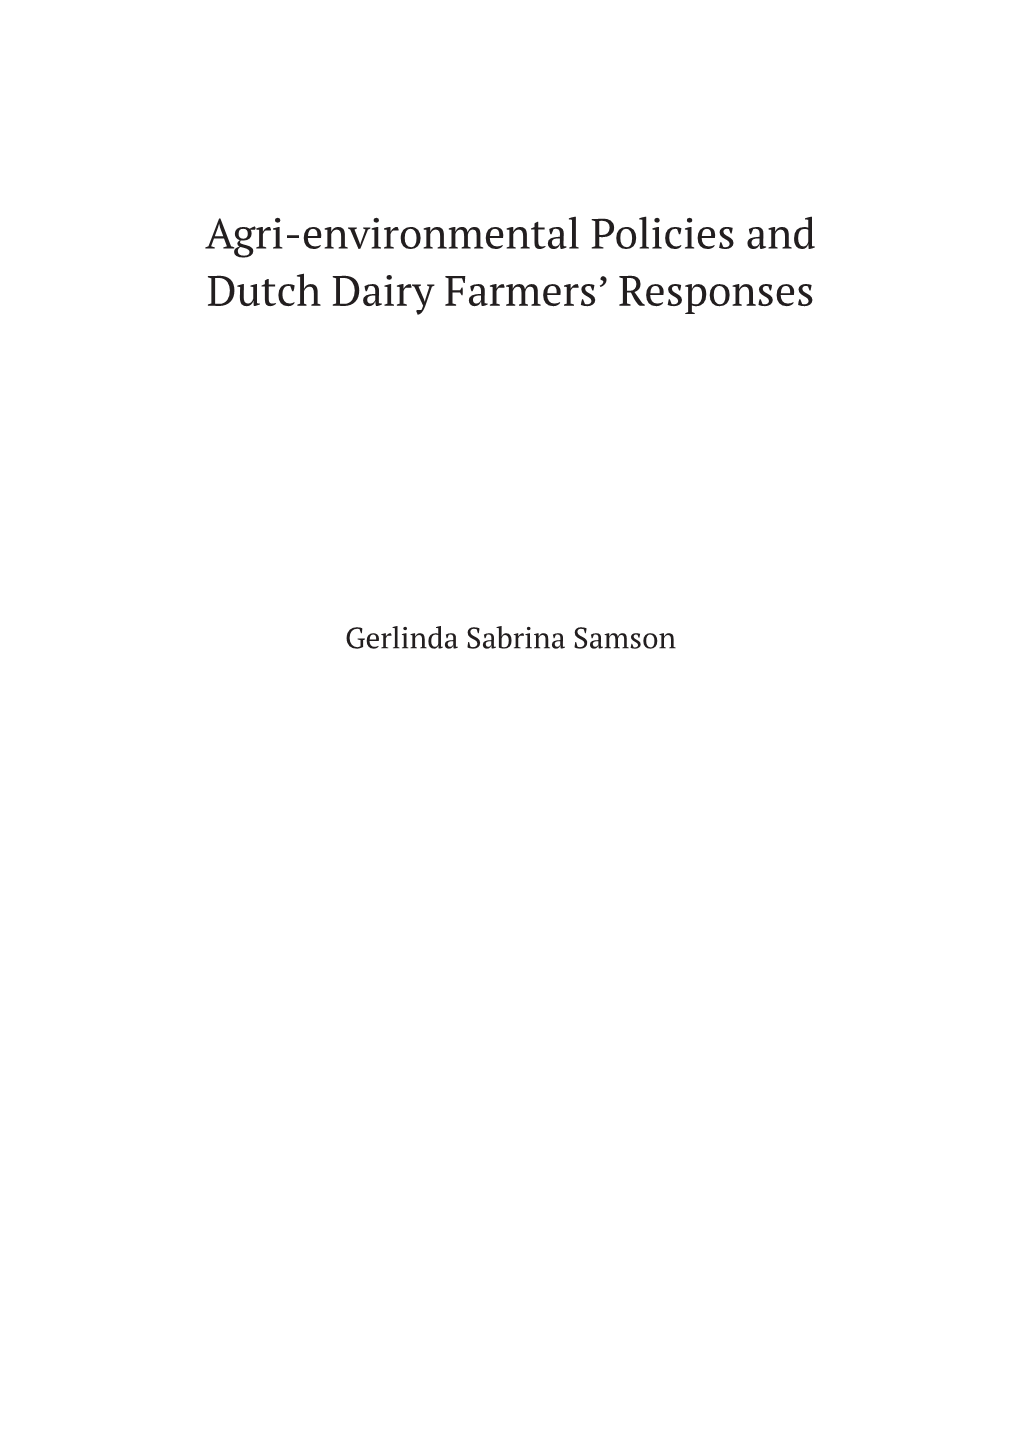 Agri-Environmental Policies and Dutch Dairy Farmers' Responses